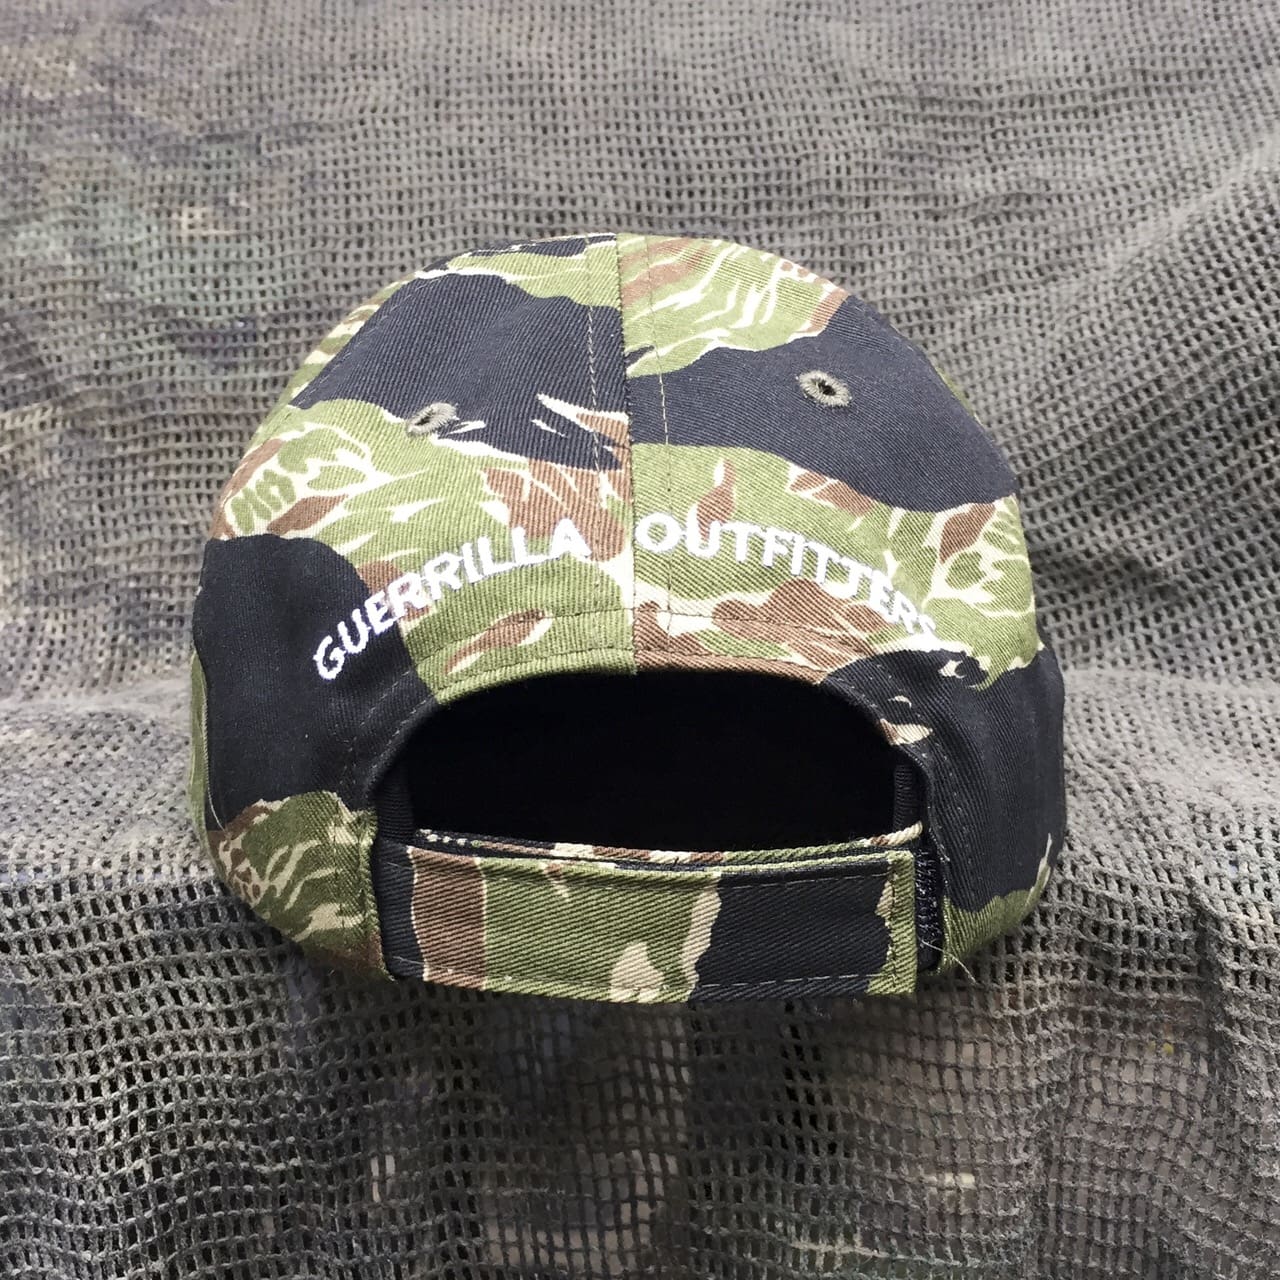 Guerilla Outfitters – Tango Mike Mike TigerStripe Ball Cap - Soldier ...